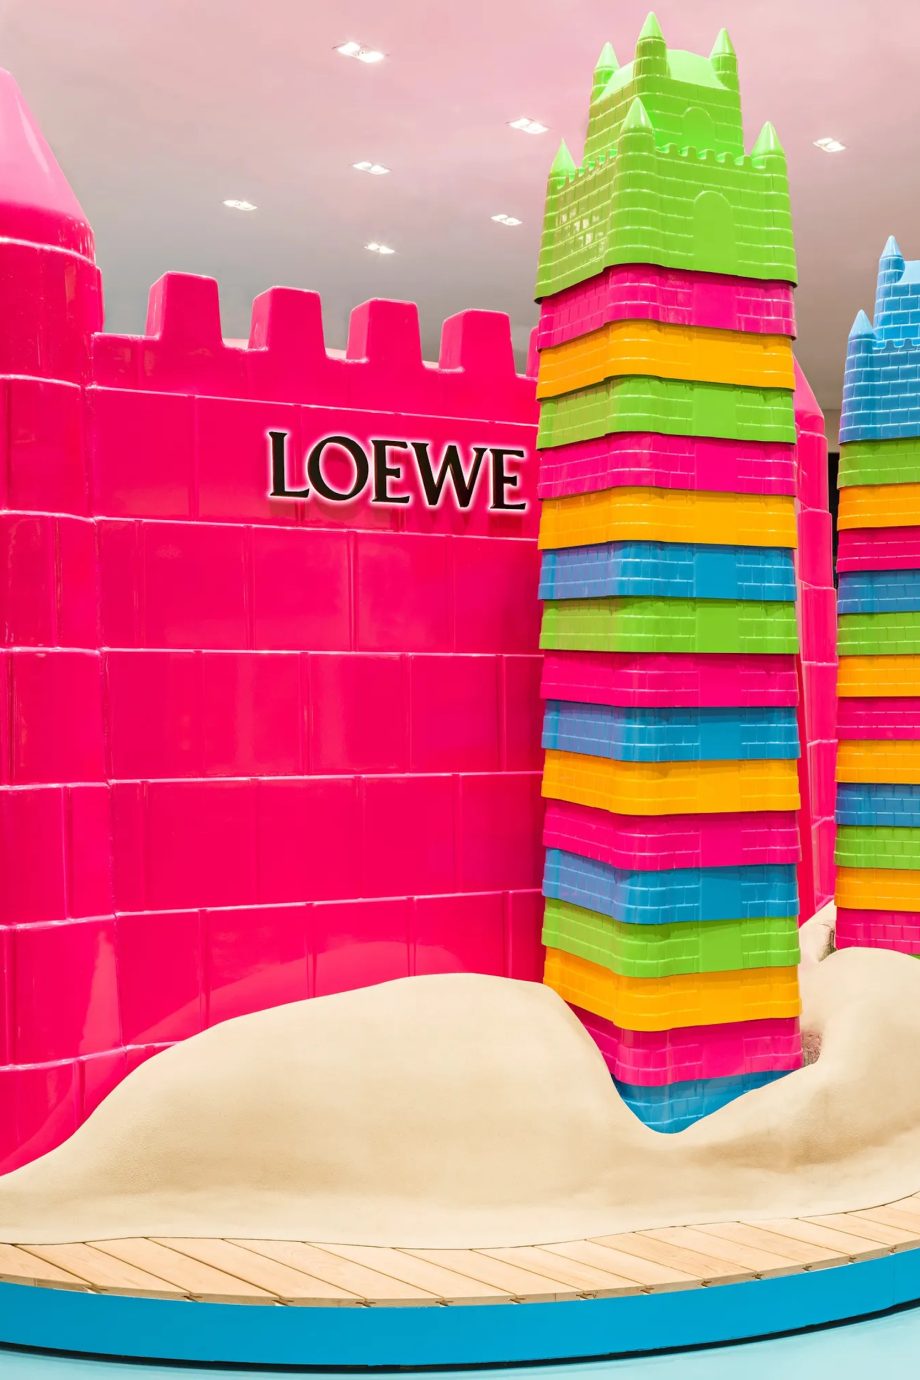 loewe-opent-zomerse-pop-up-in-galeries-lafayette-252637